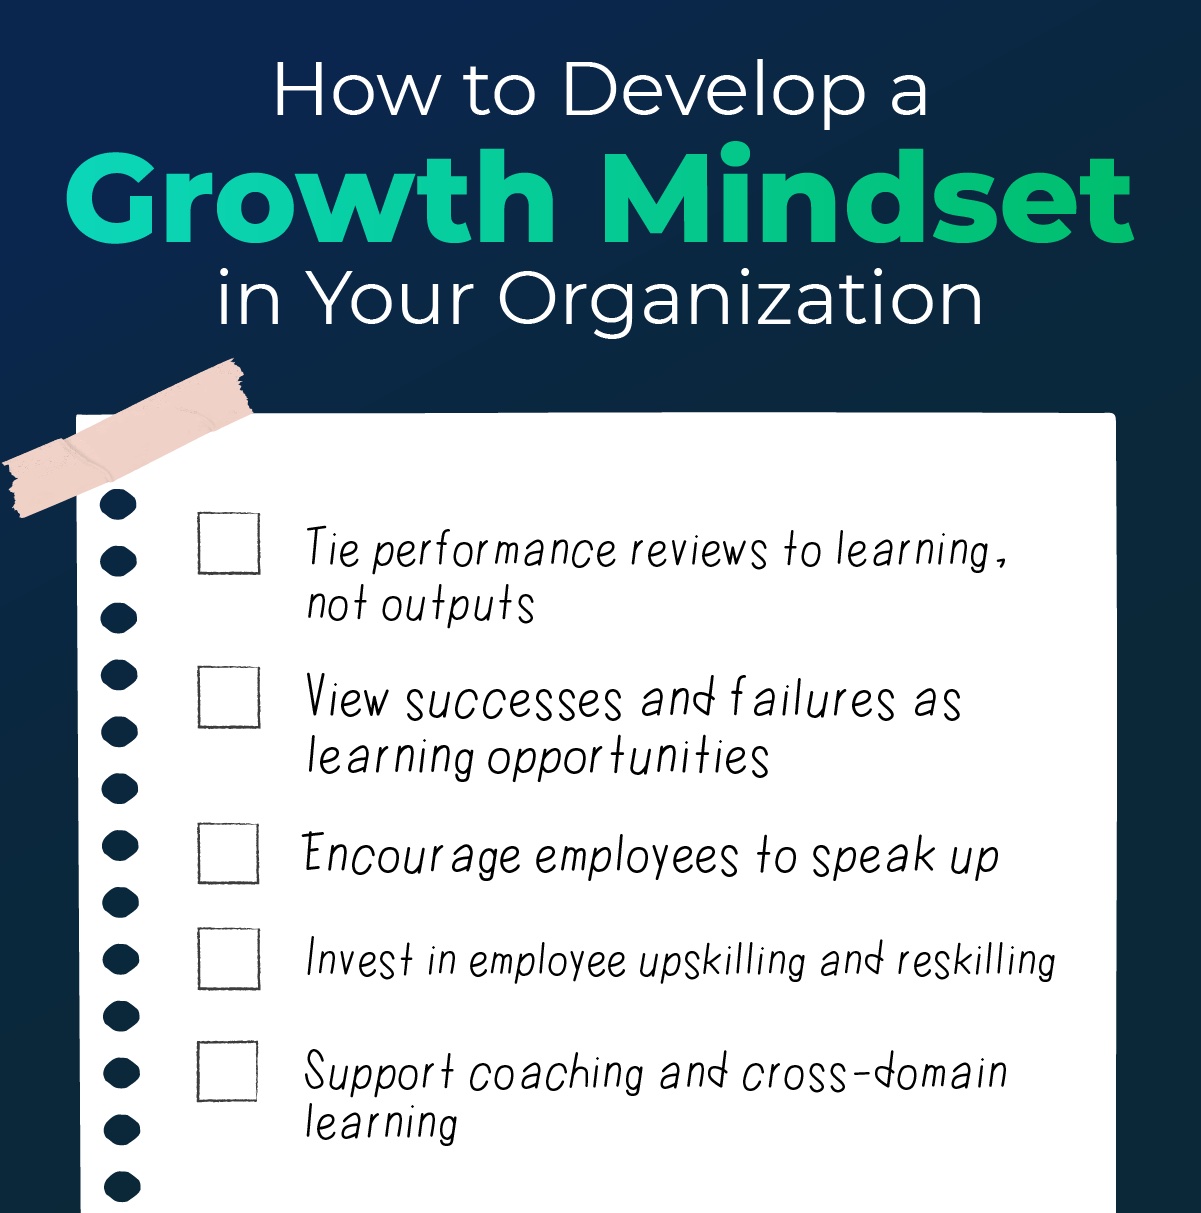 Checklist explaining how to build a growth mindset in the workplace